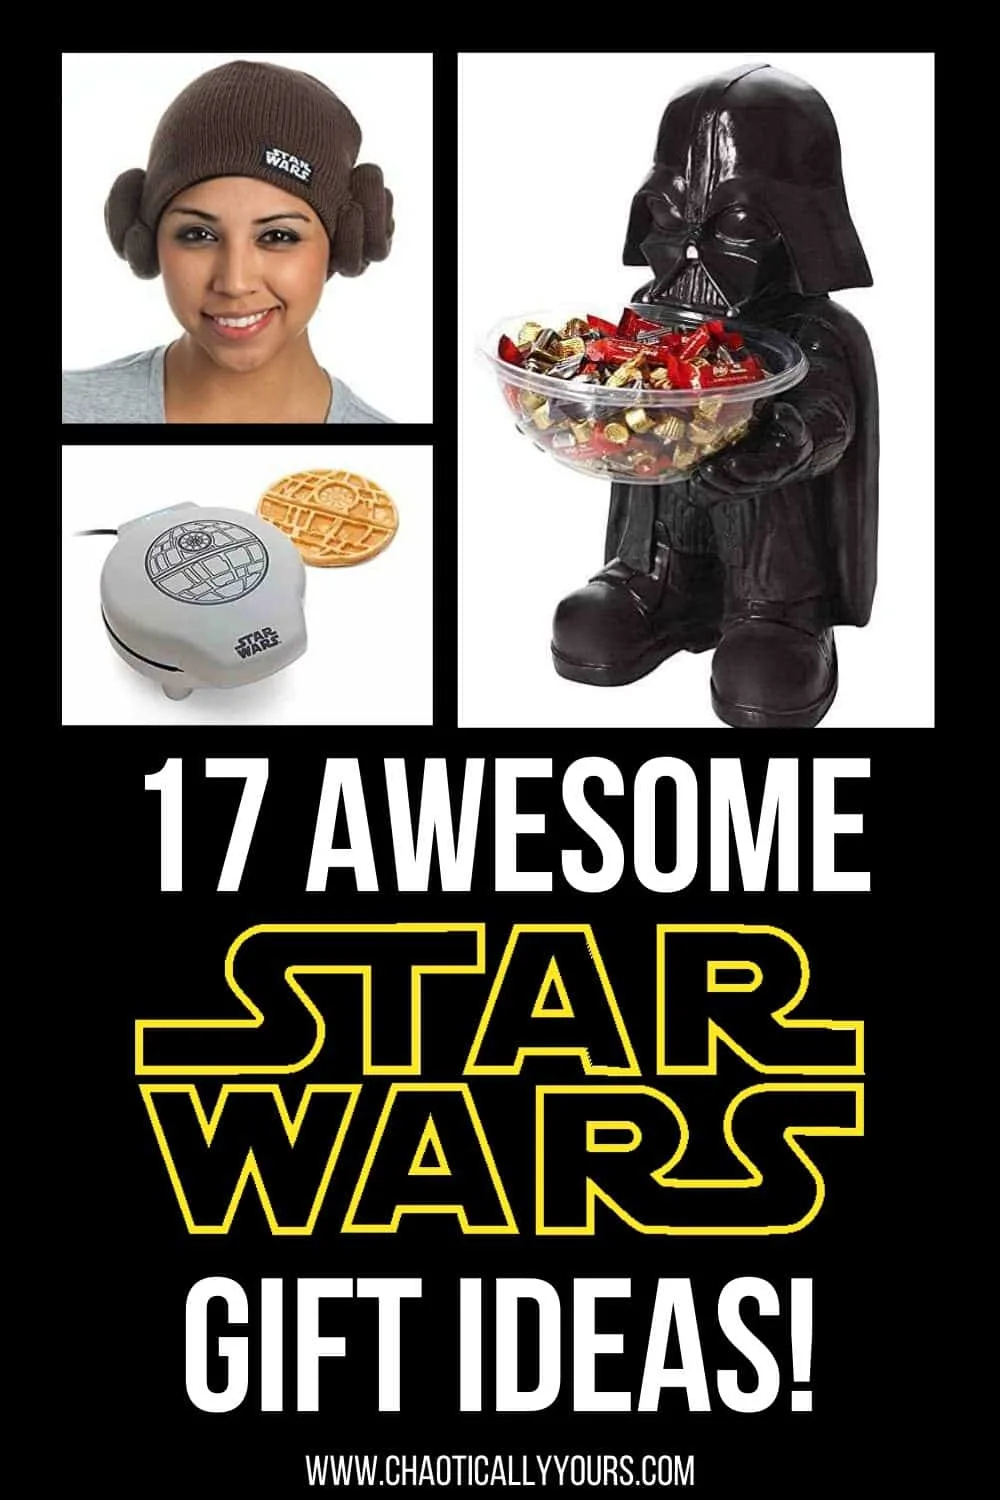 17 Awesome Star Wars Gifts! - Chaotically Yours